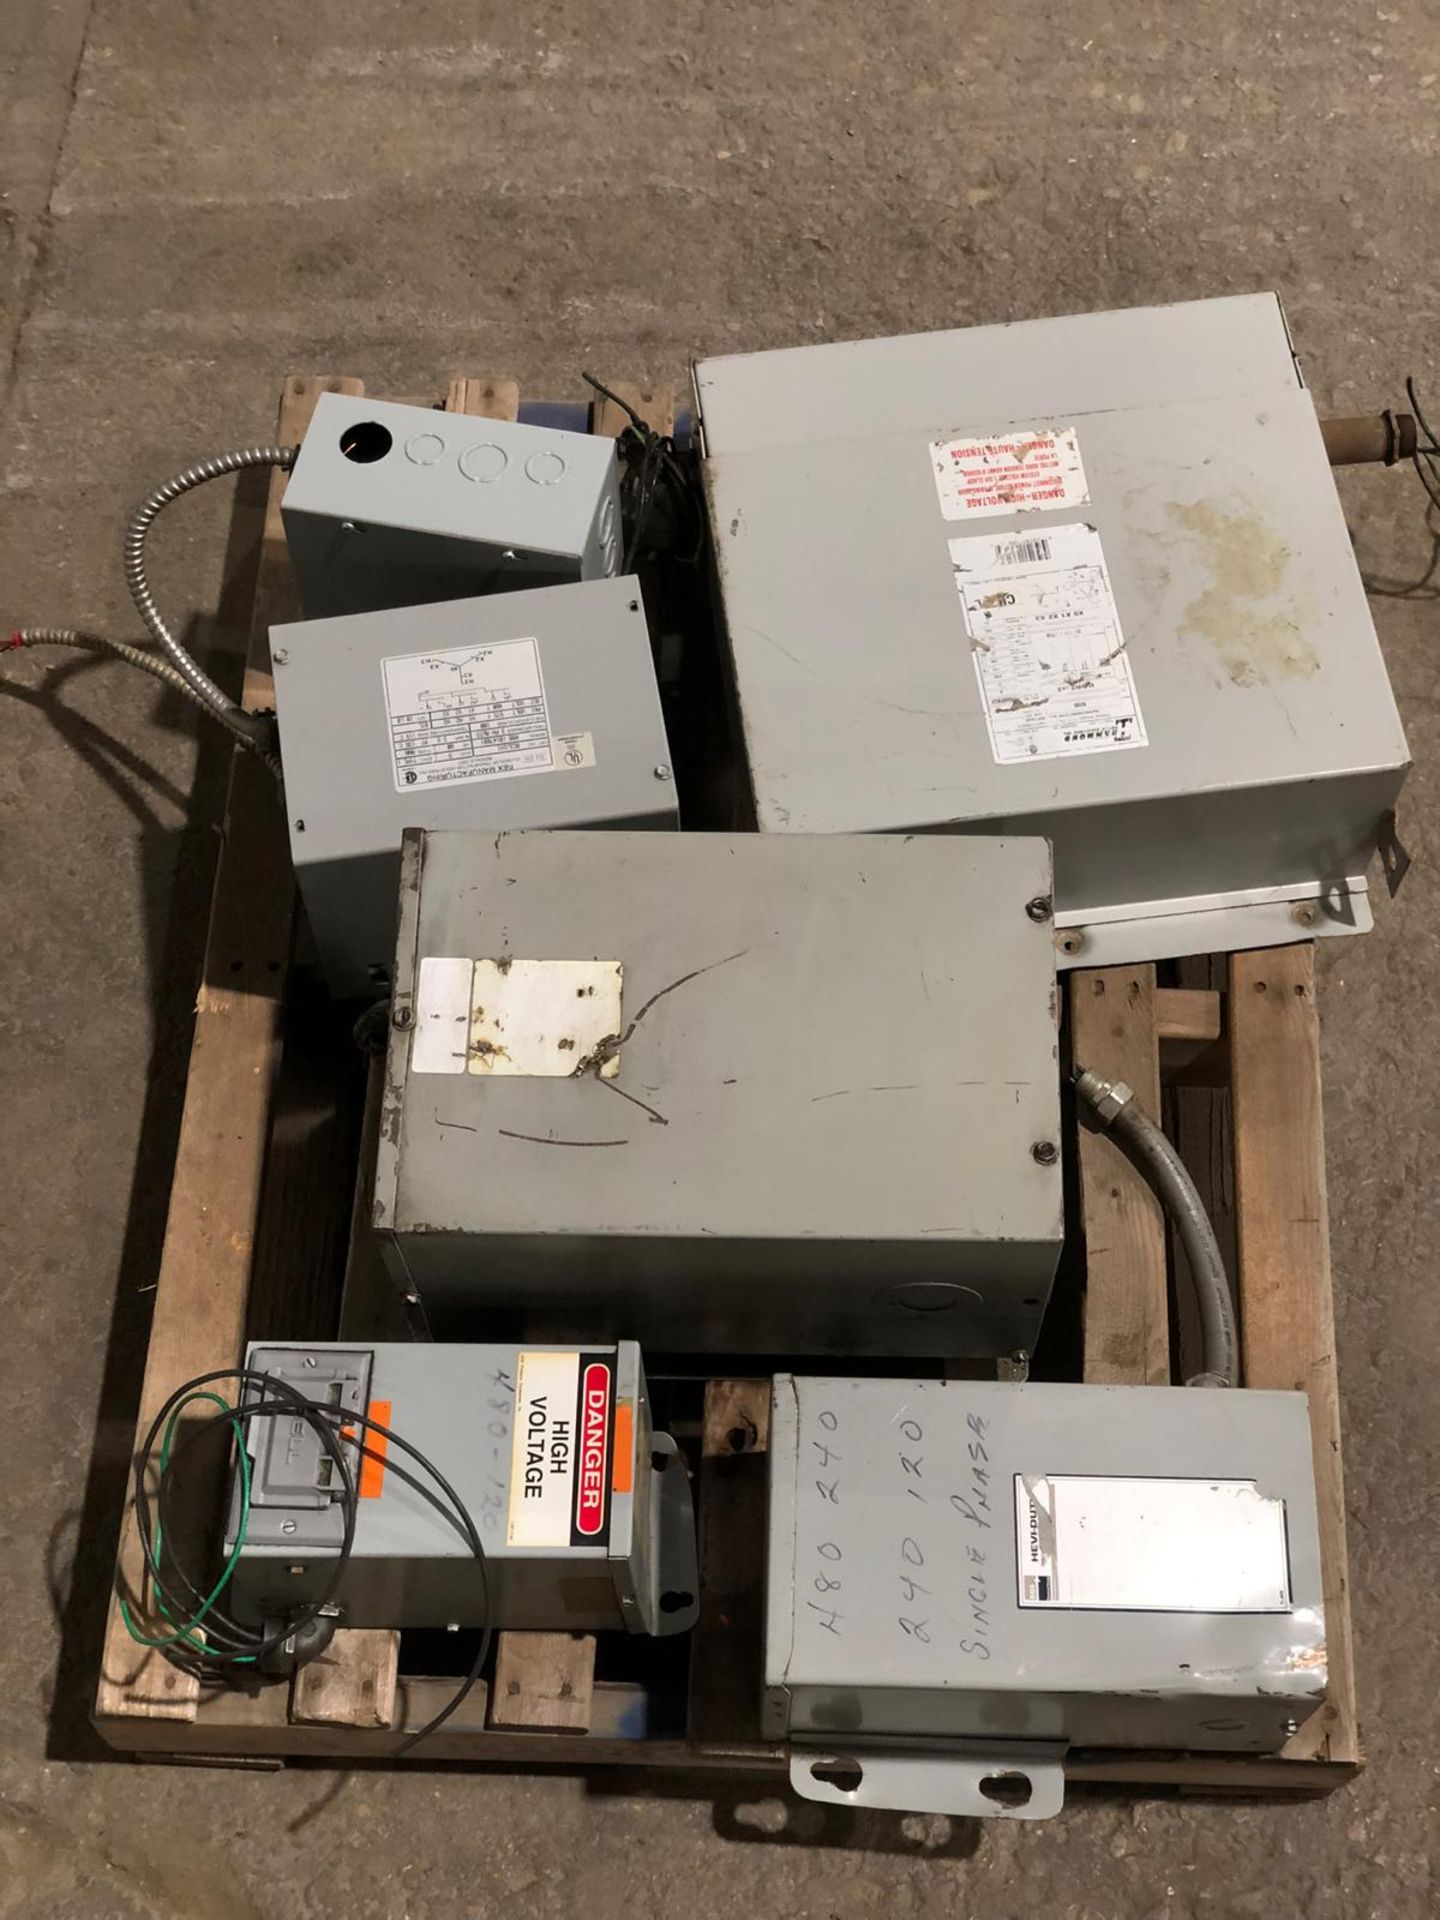 Lot of 5 (5 units) Electrical Transformers 1.5 to 5KVA units